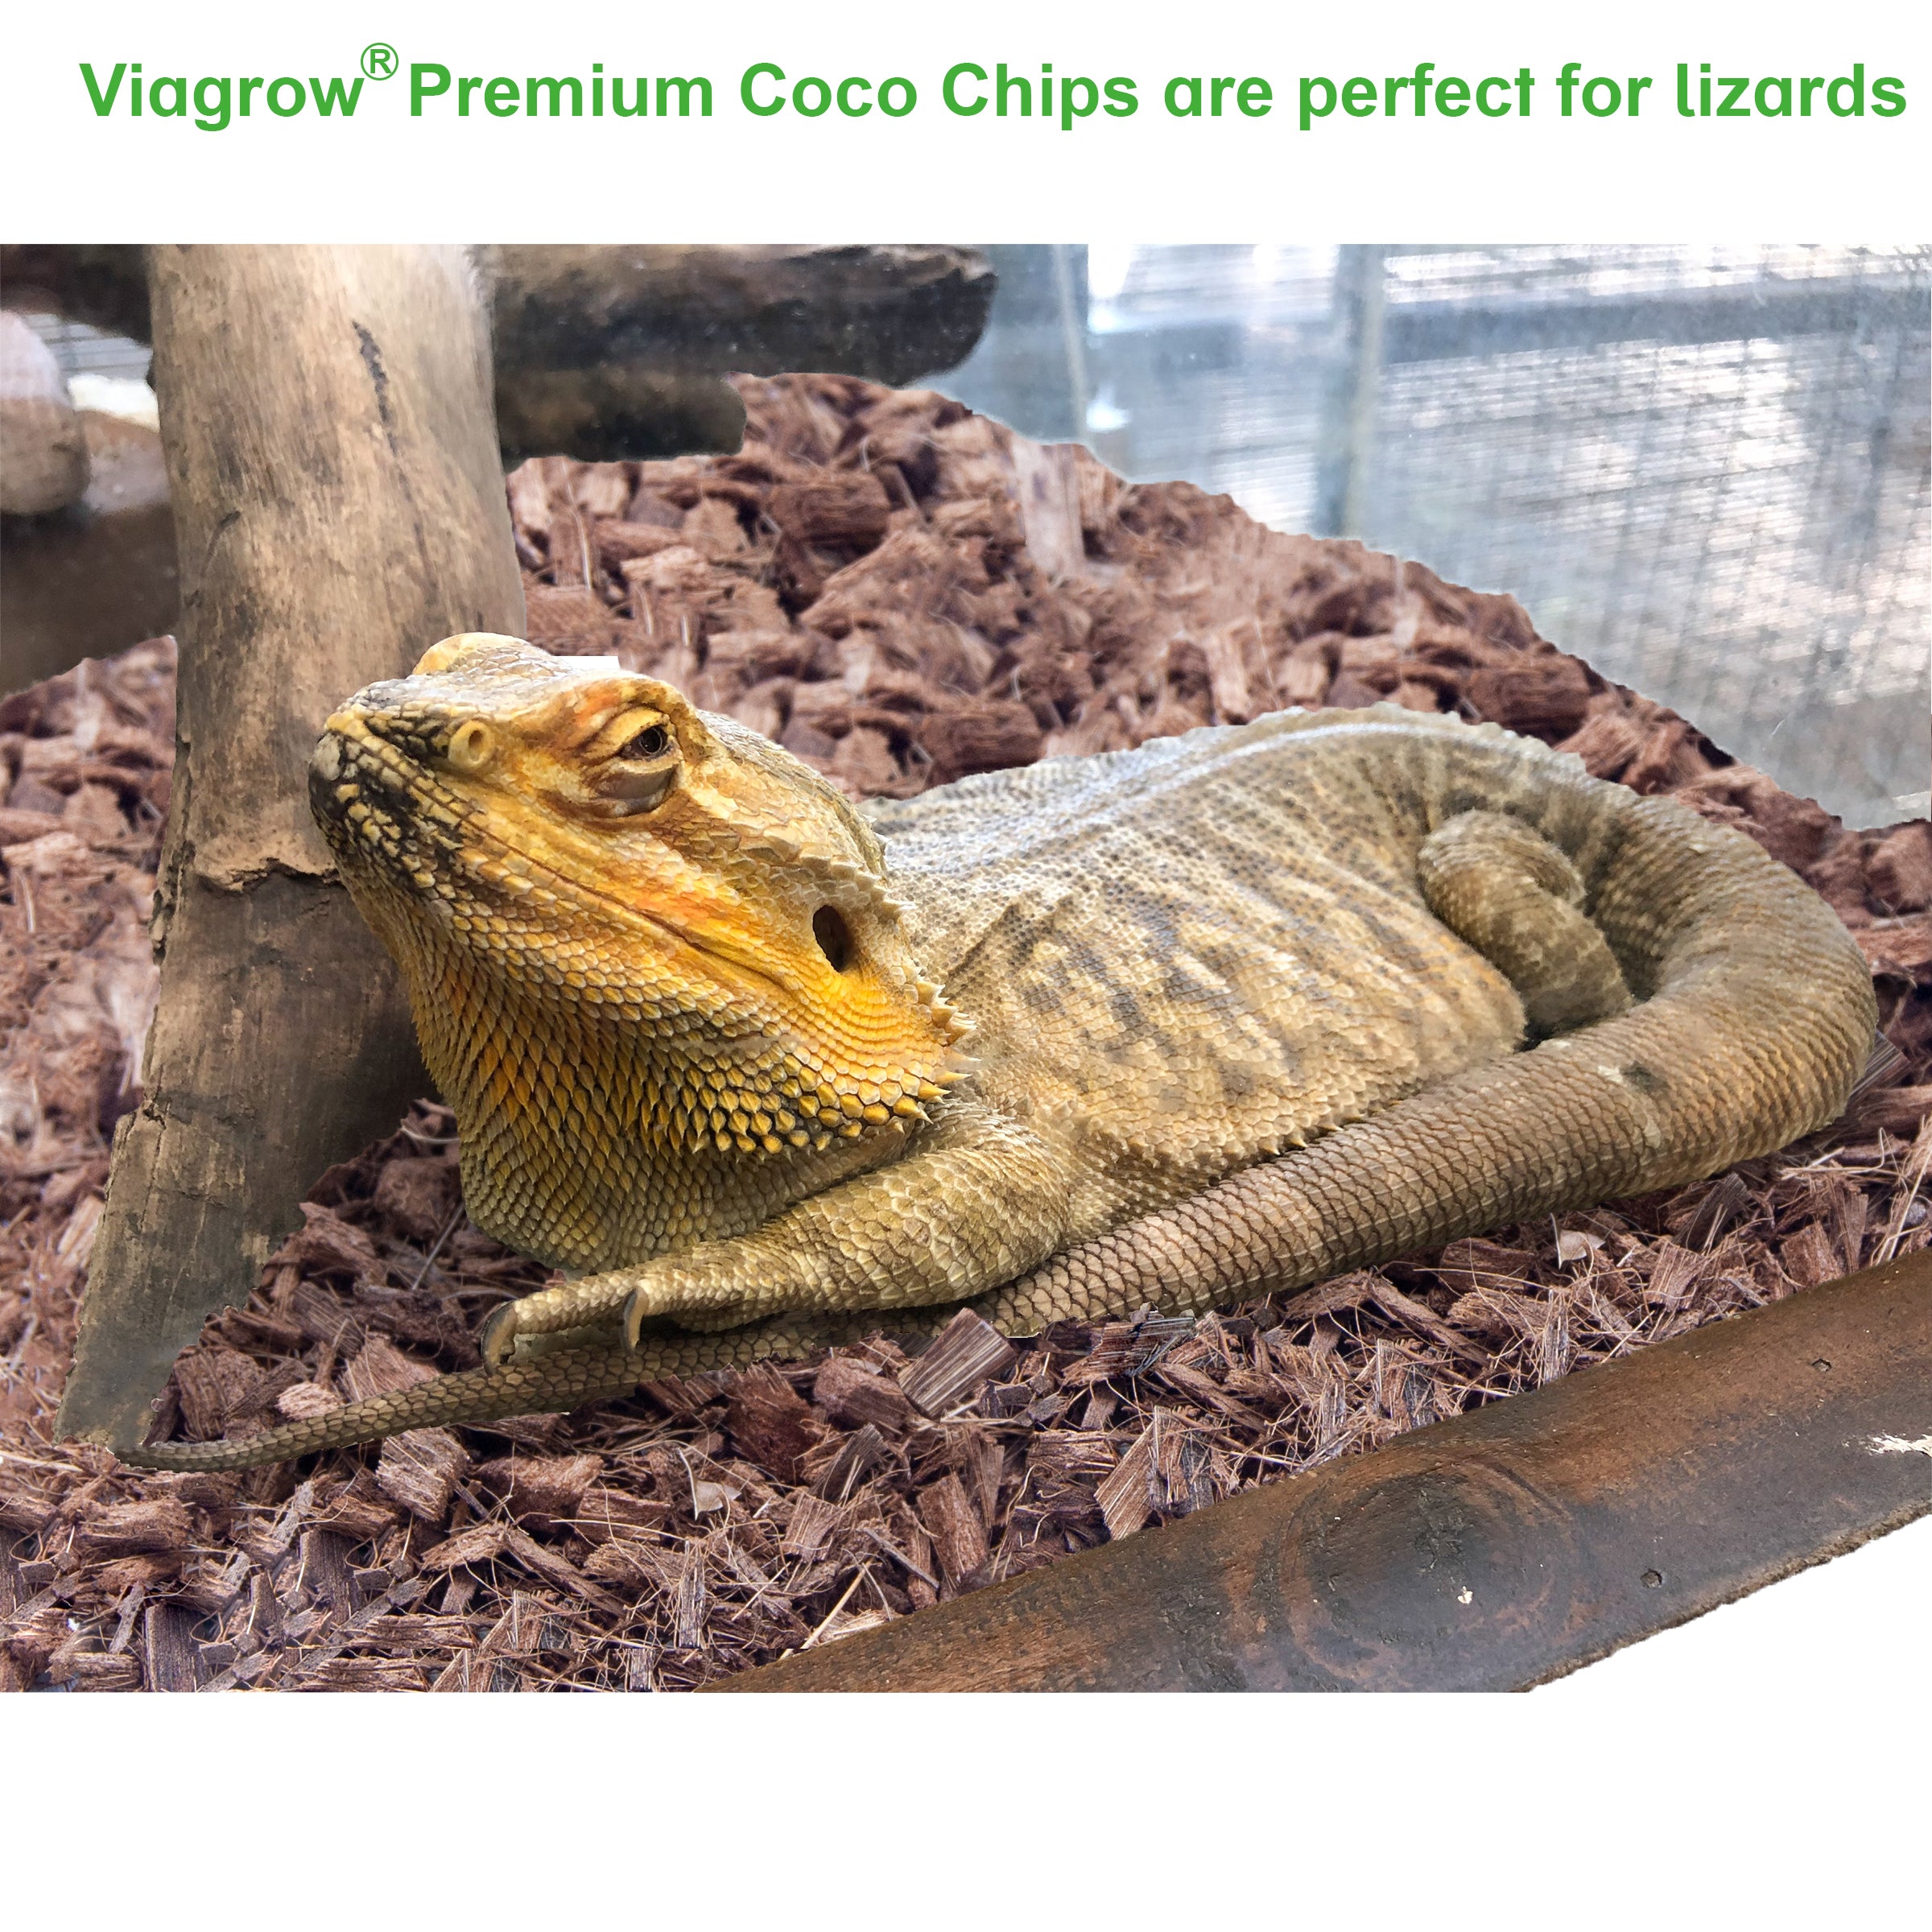 Viagrow 72 Qt. / 68 l / 18 Gal. Premium Coconut Reptile Substrate Coco Coir Chips, 2-Pack